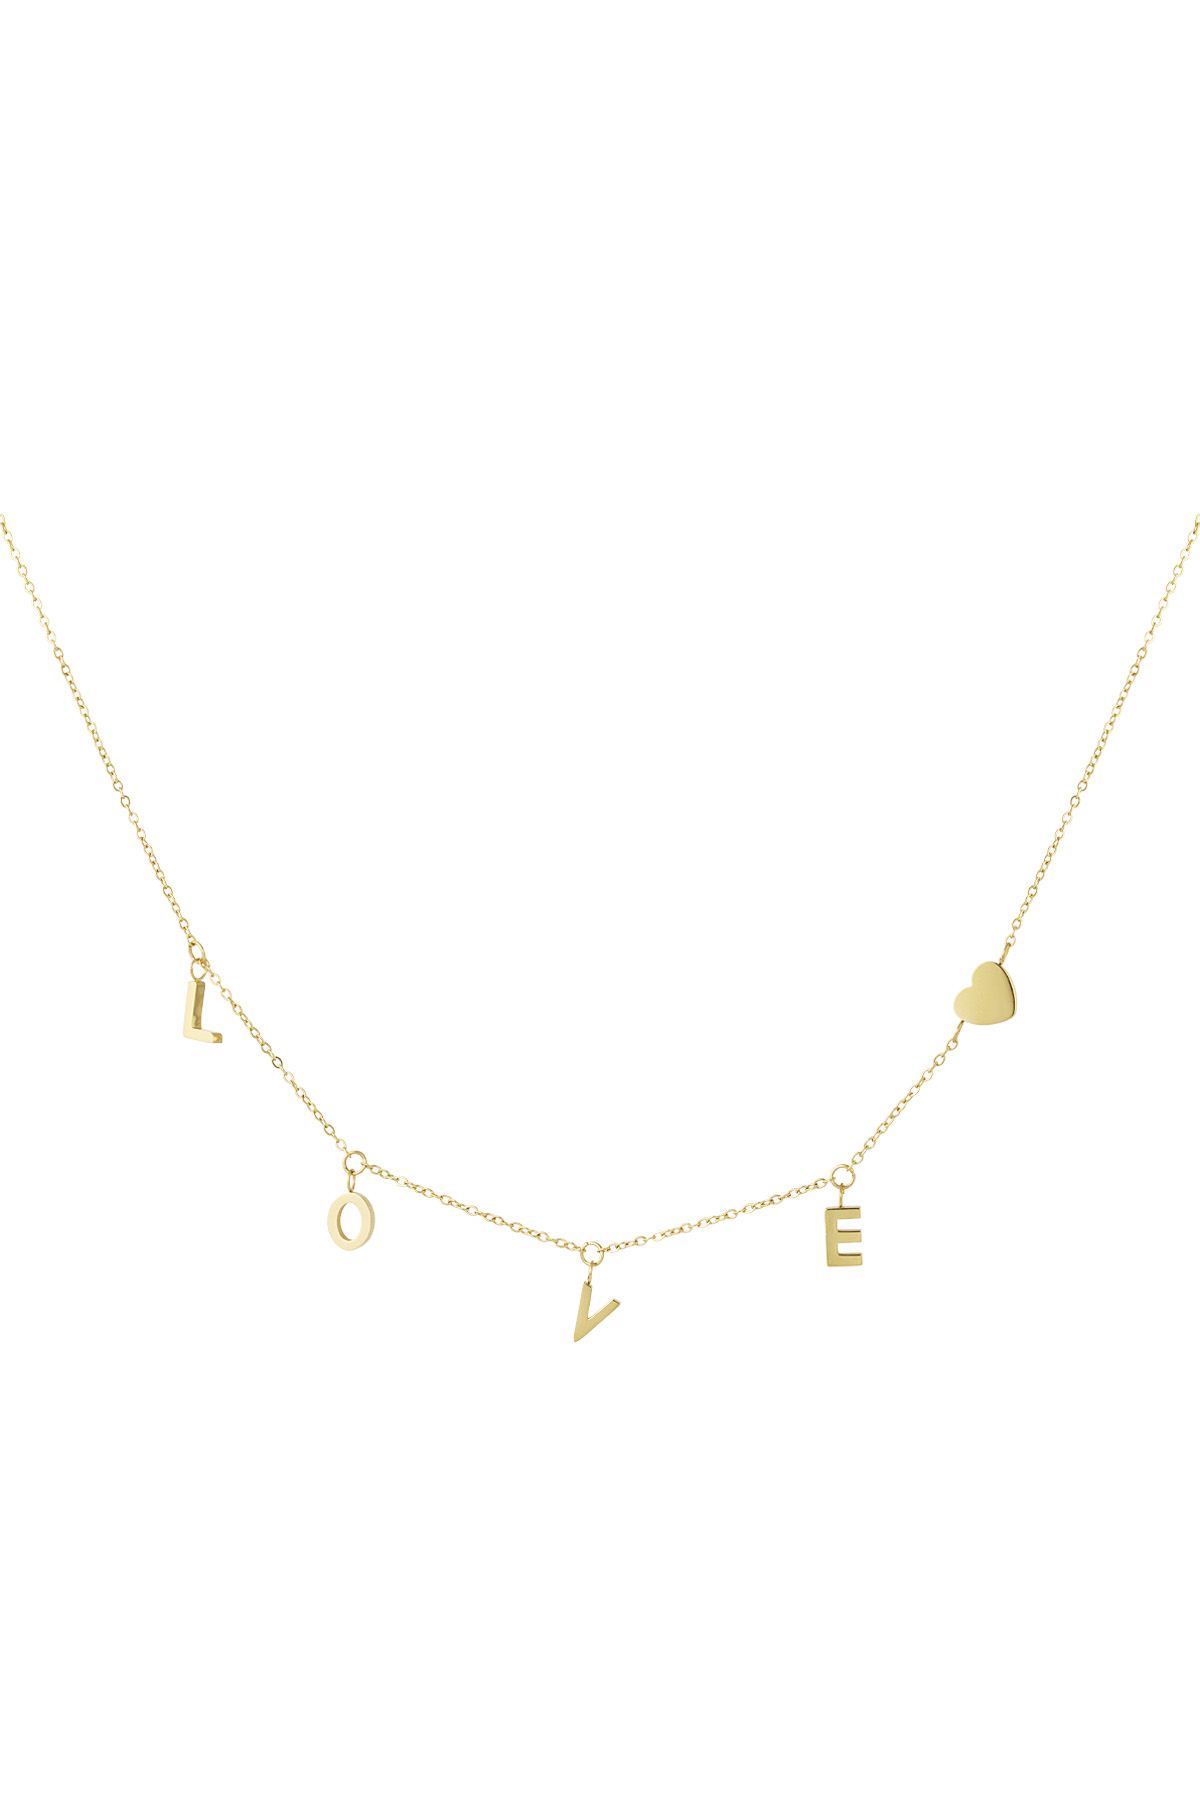 Necklace lover world - gold h5 